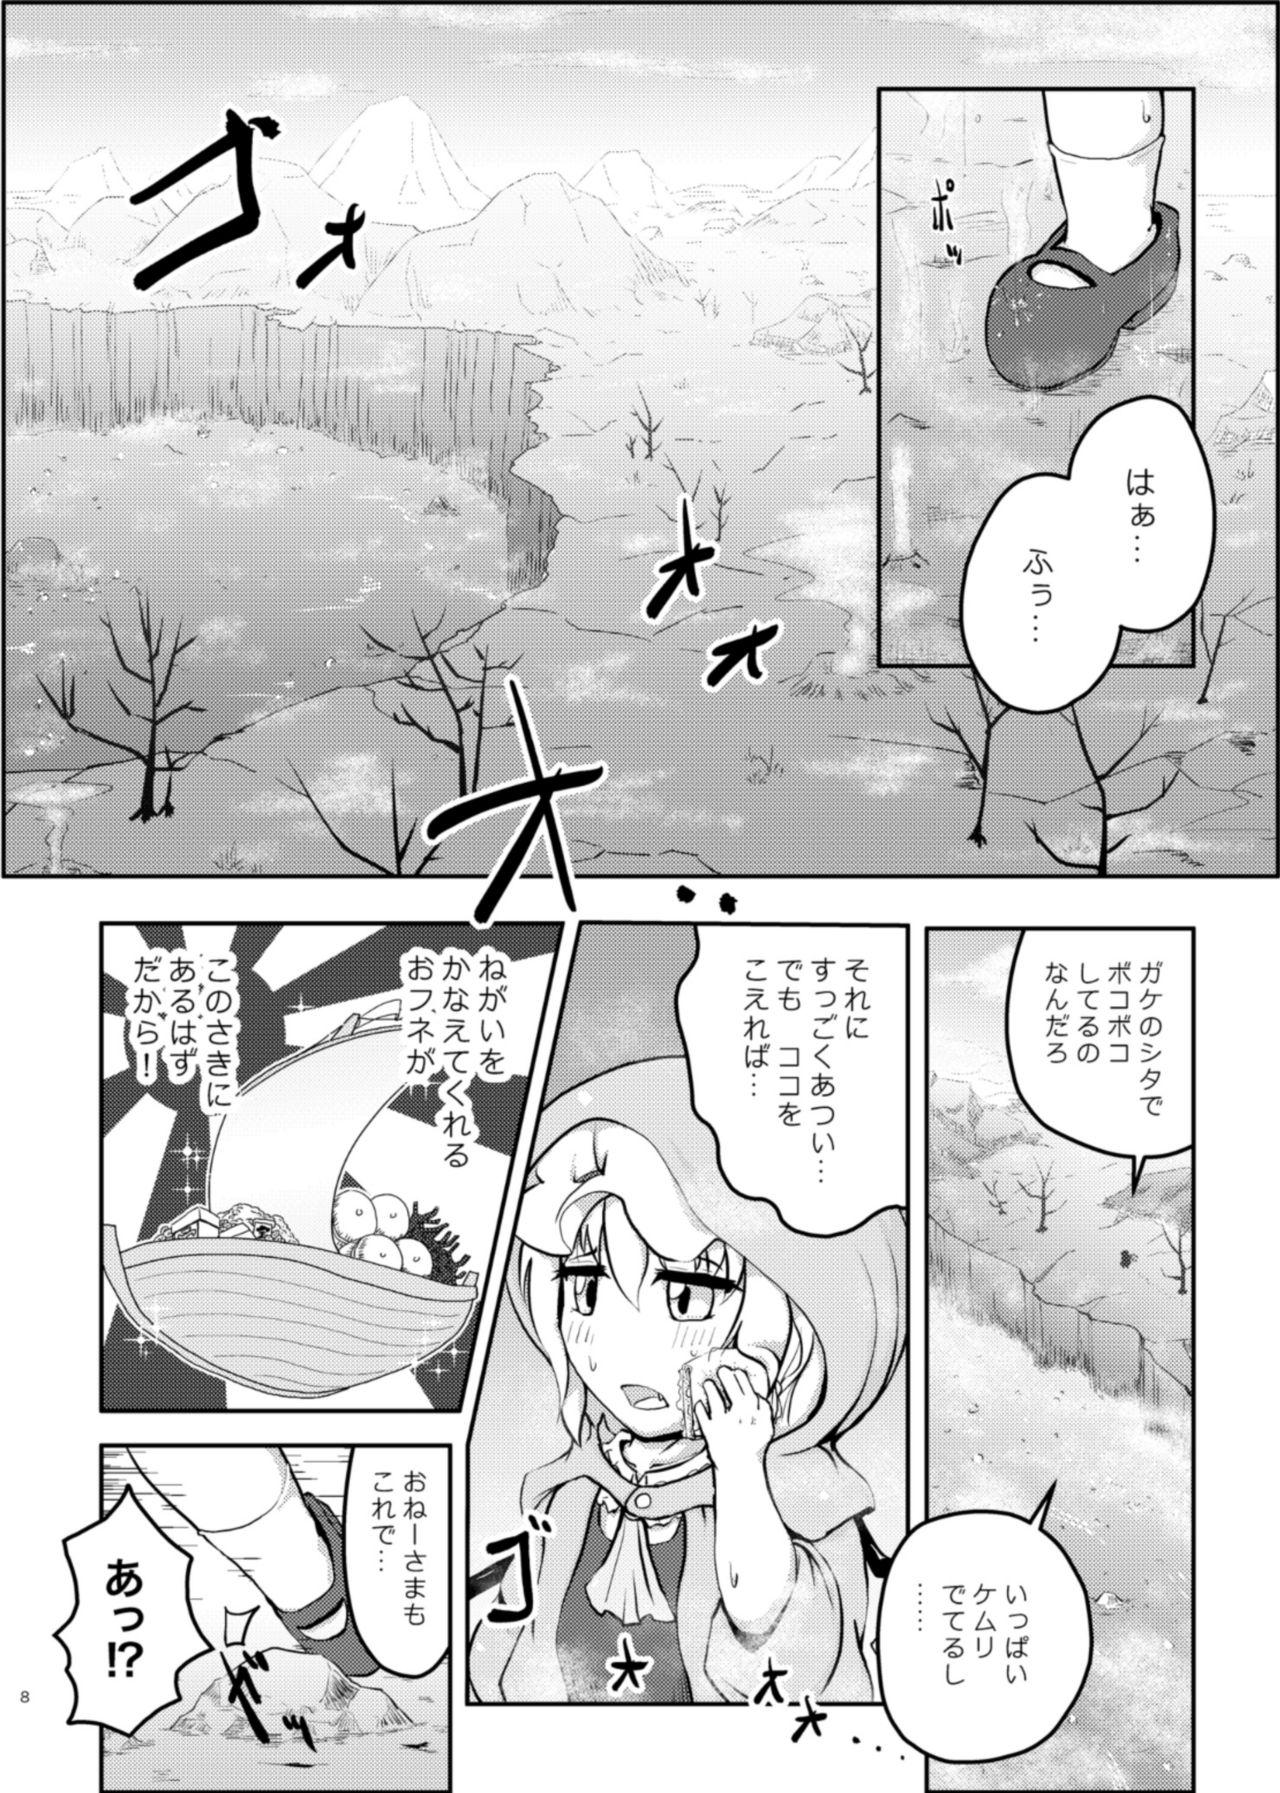 Lima Scarlet Conflict 2 - Touhou project Gay Medical - Page 8